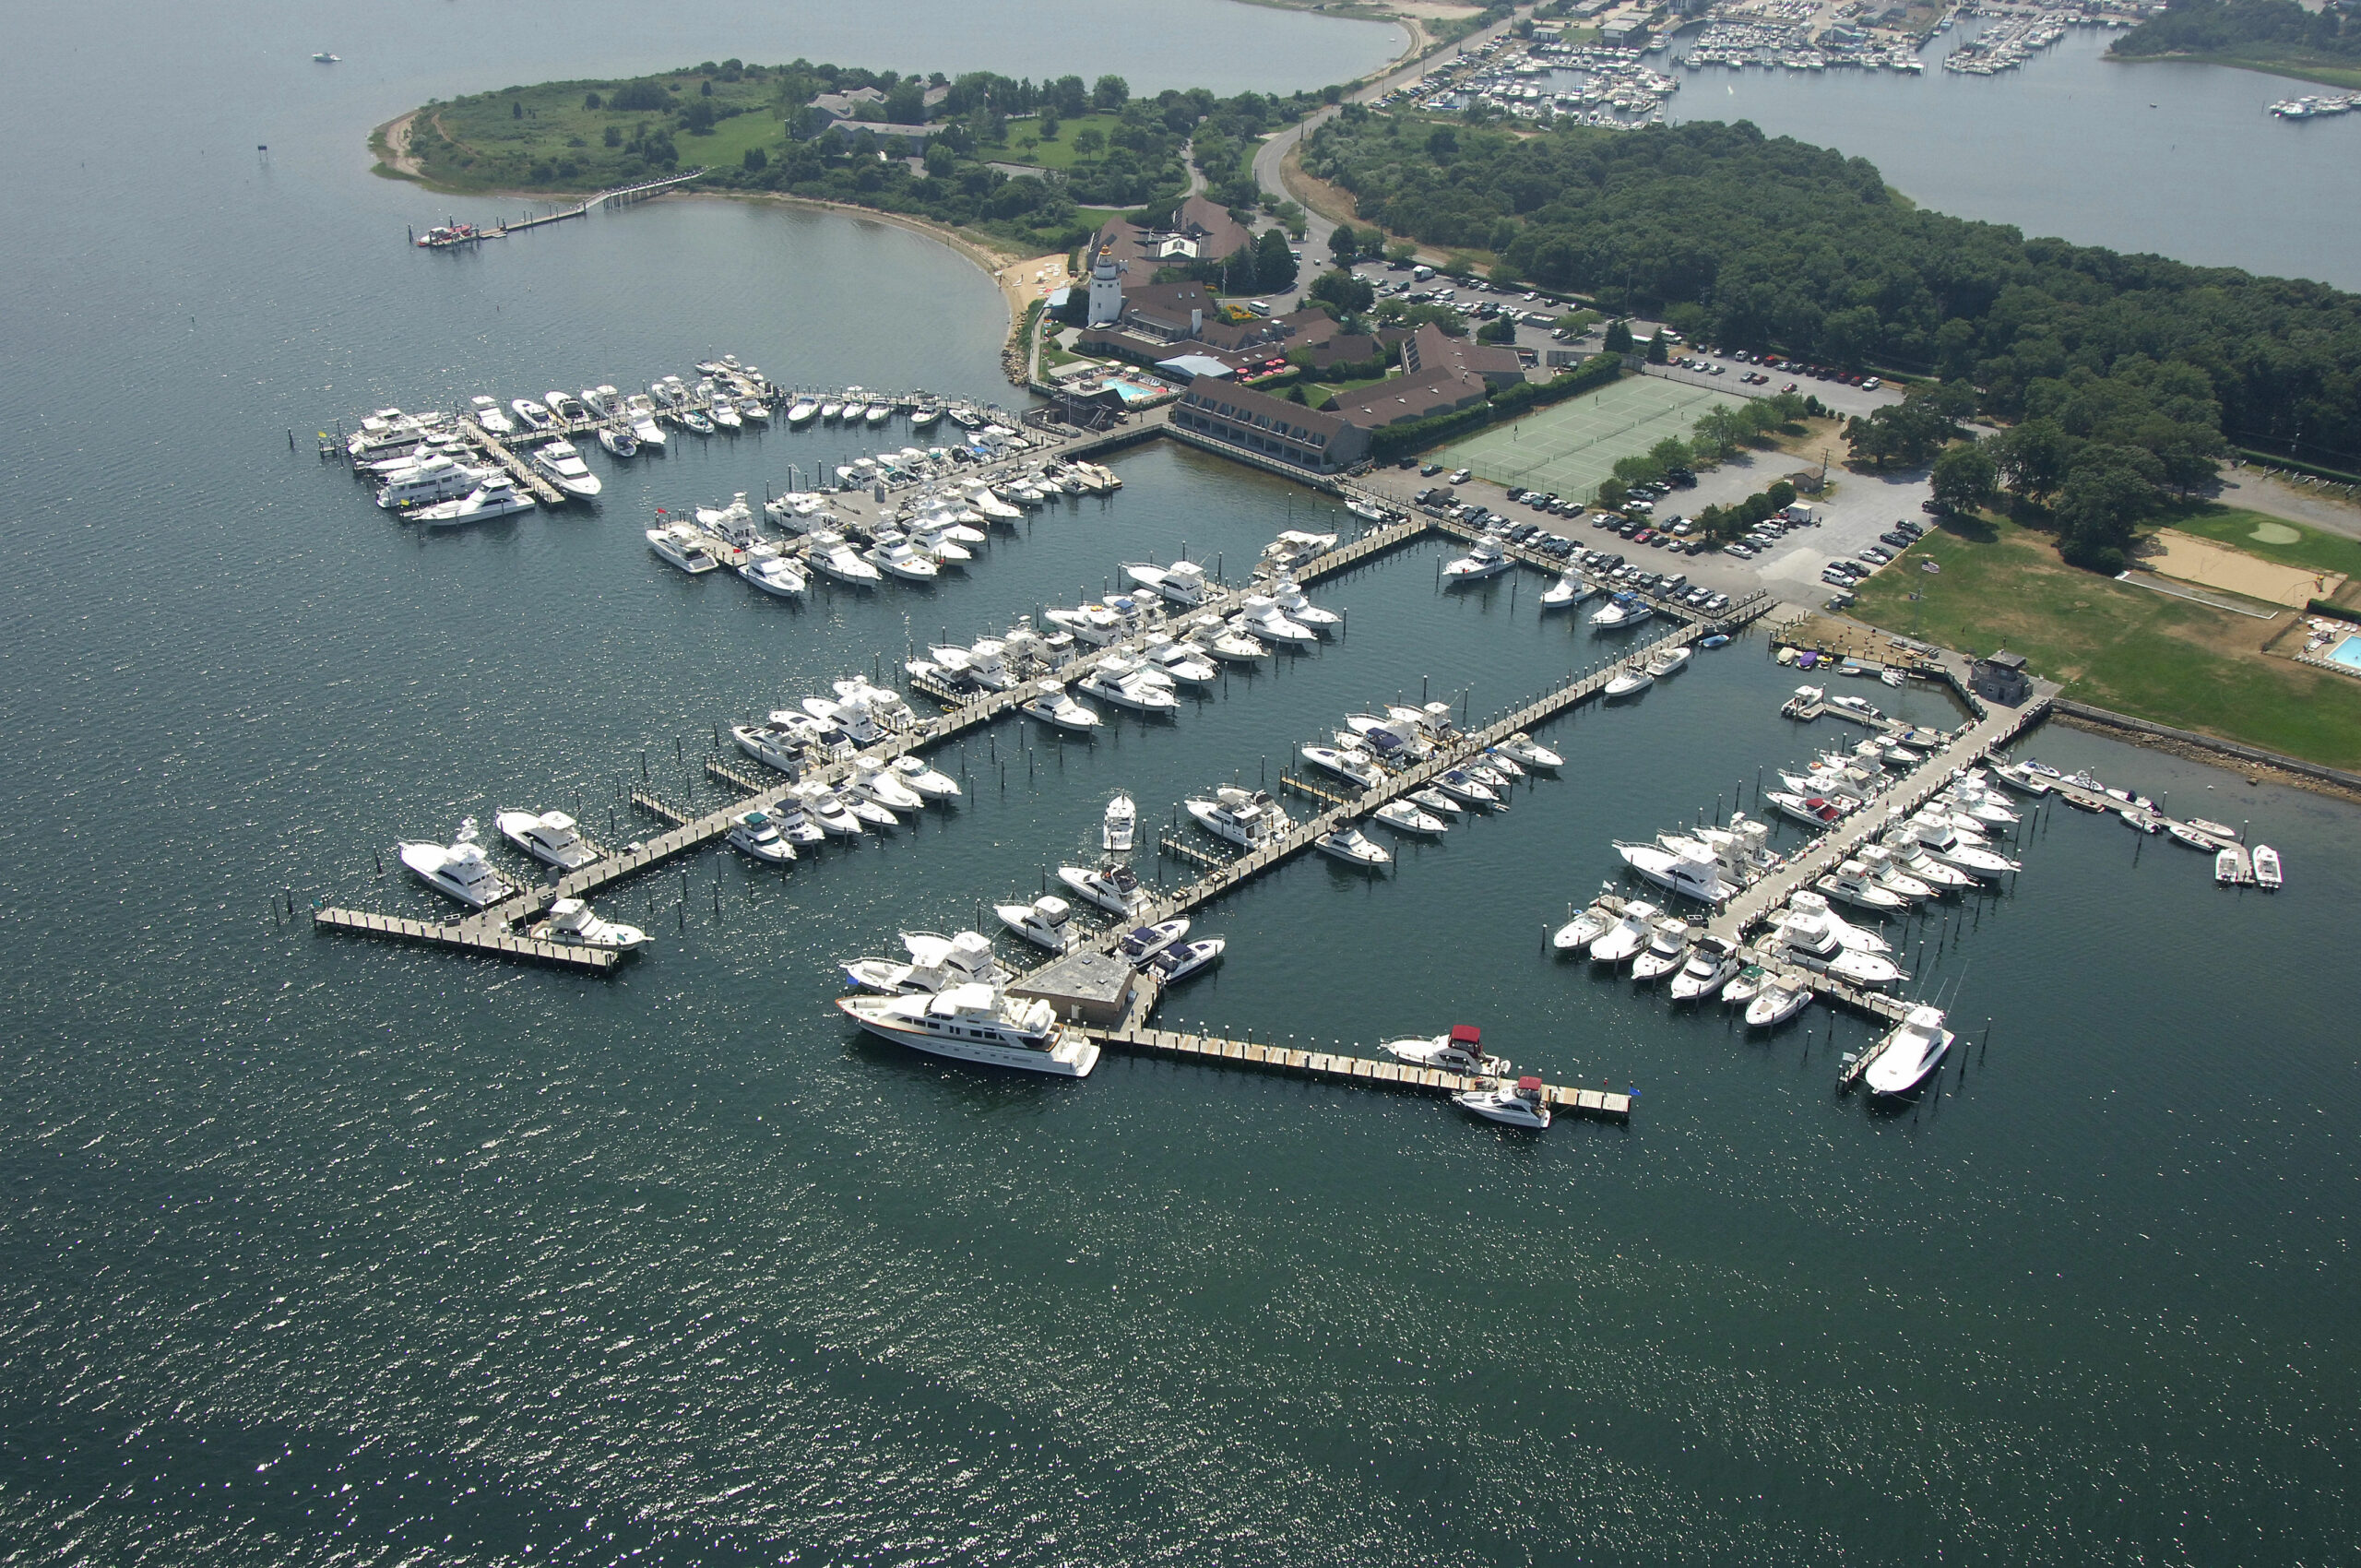 The Montauk Yacht Club will again be known by its traditional name, after the international marina giant Safe Harbor purchased the property from Gurneys Resorts recently.